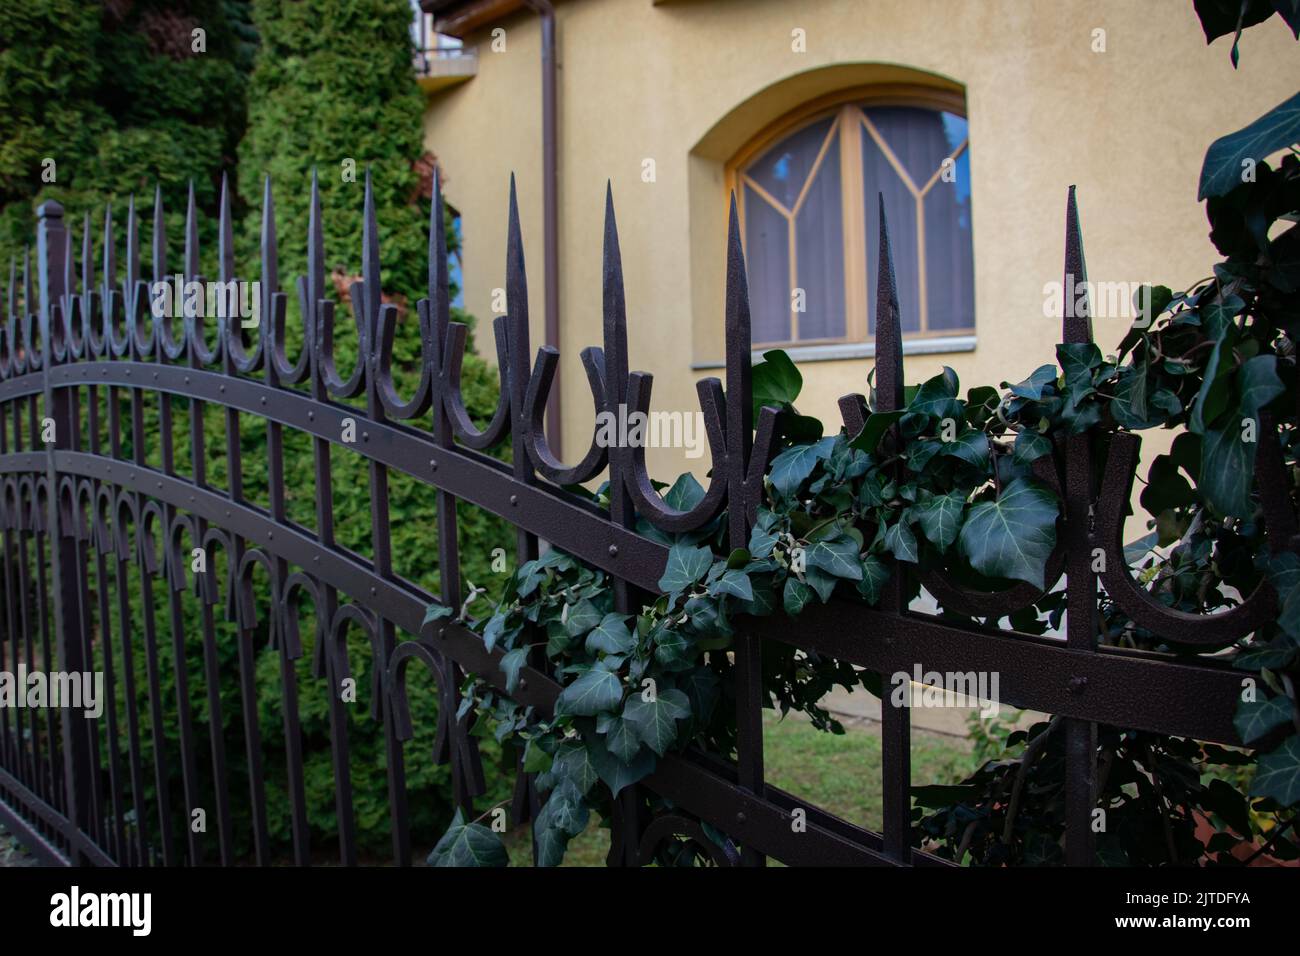 Ornate metal railings with Ivy growing Stock Photo